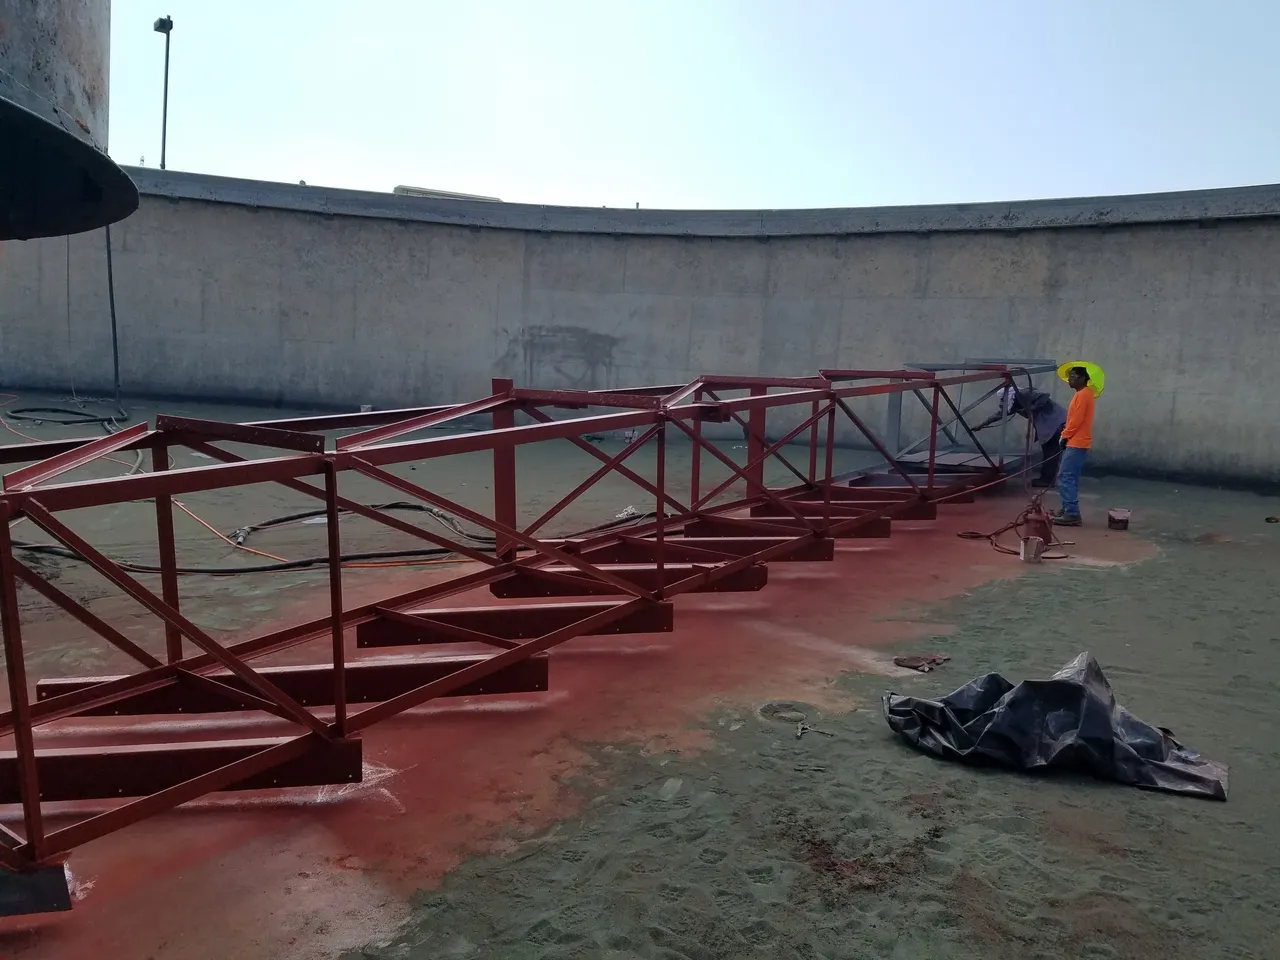 A man standing next to a red metal structure.